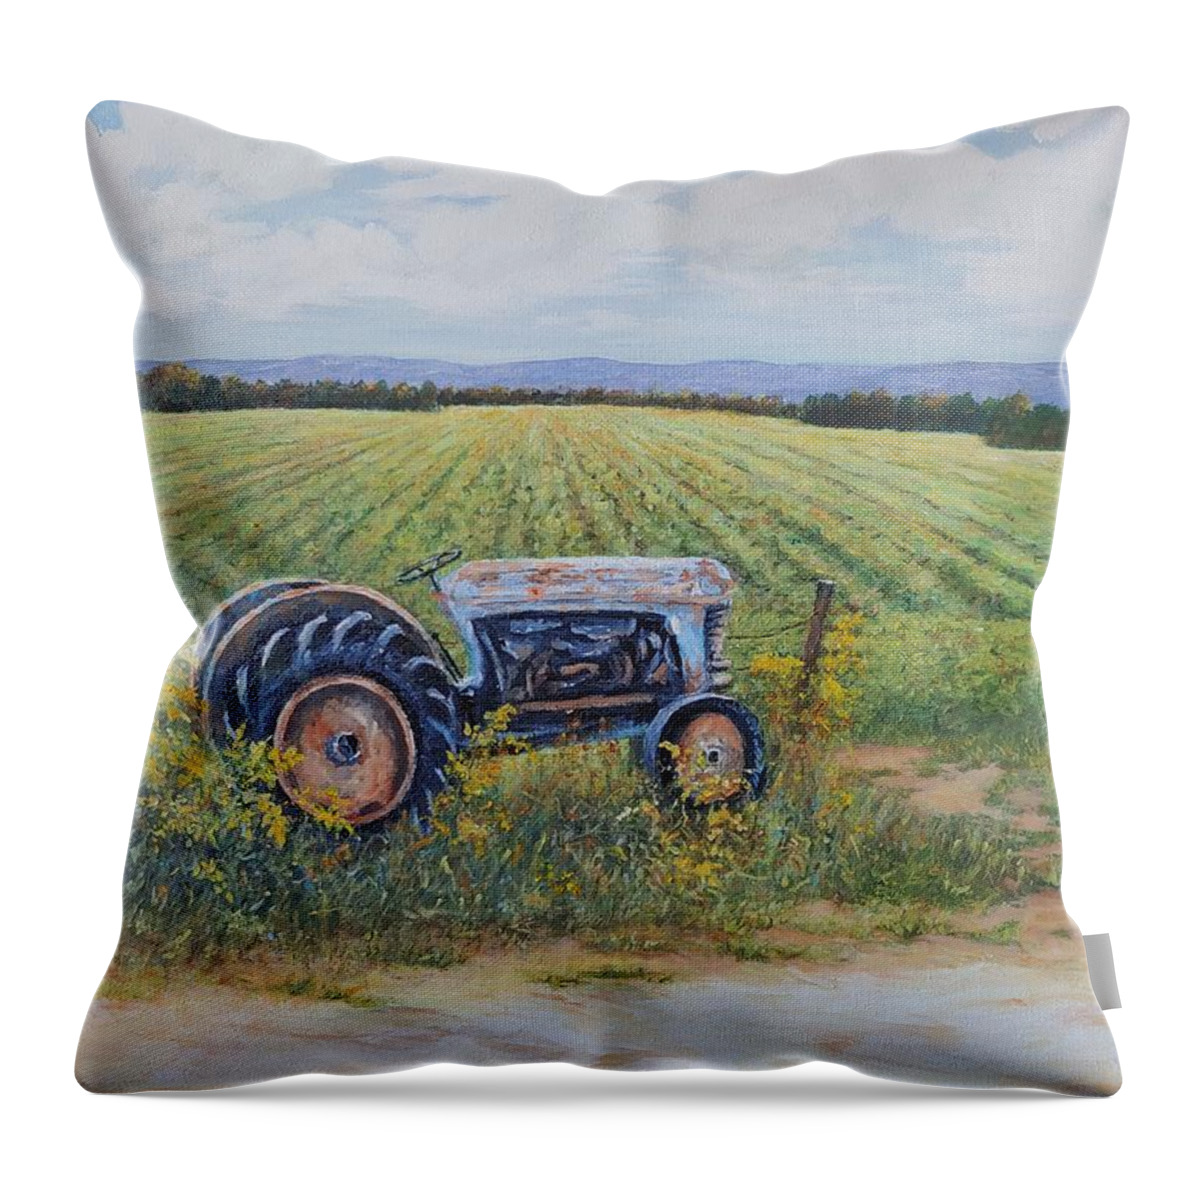 Home Throw Pillow featuring the painting Grandpa's Tractor by ML McCormick